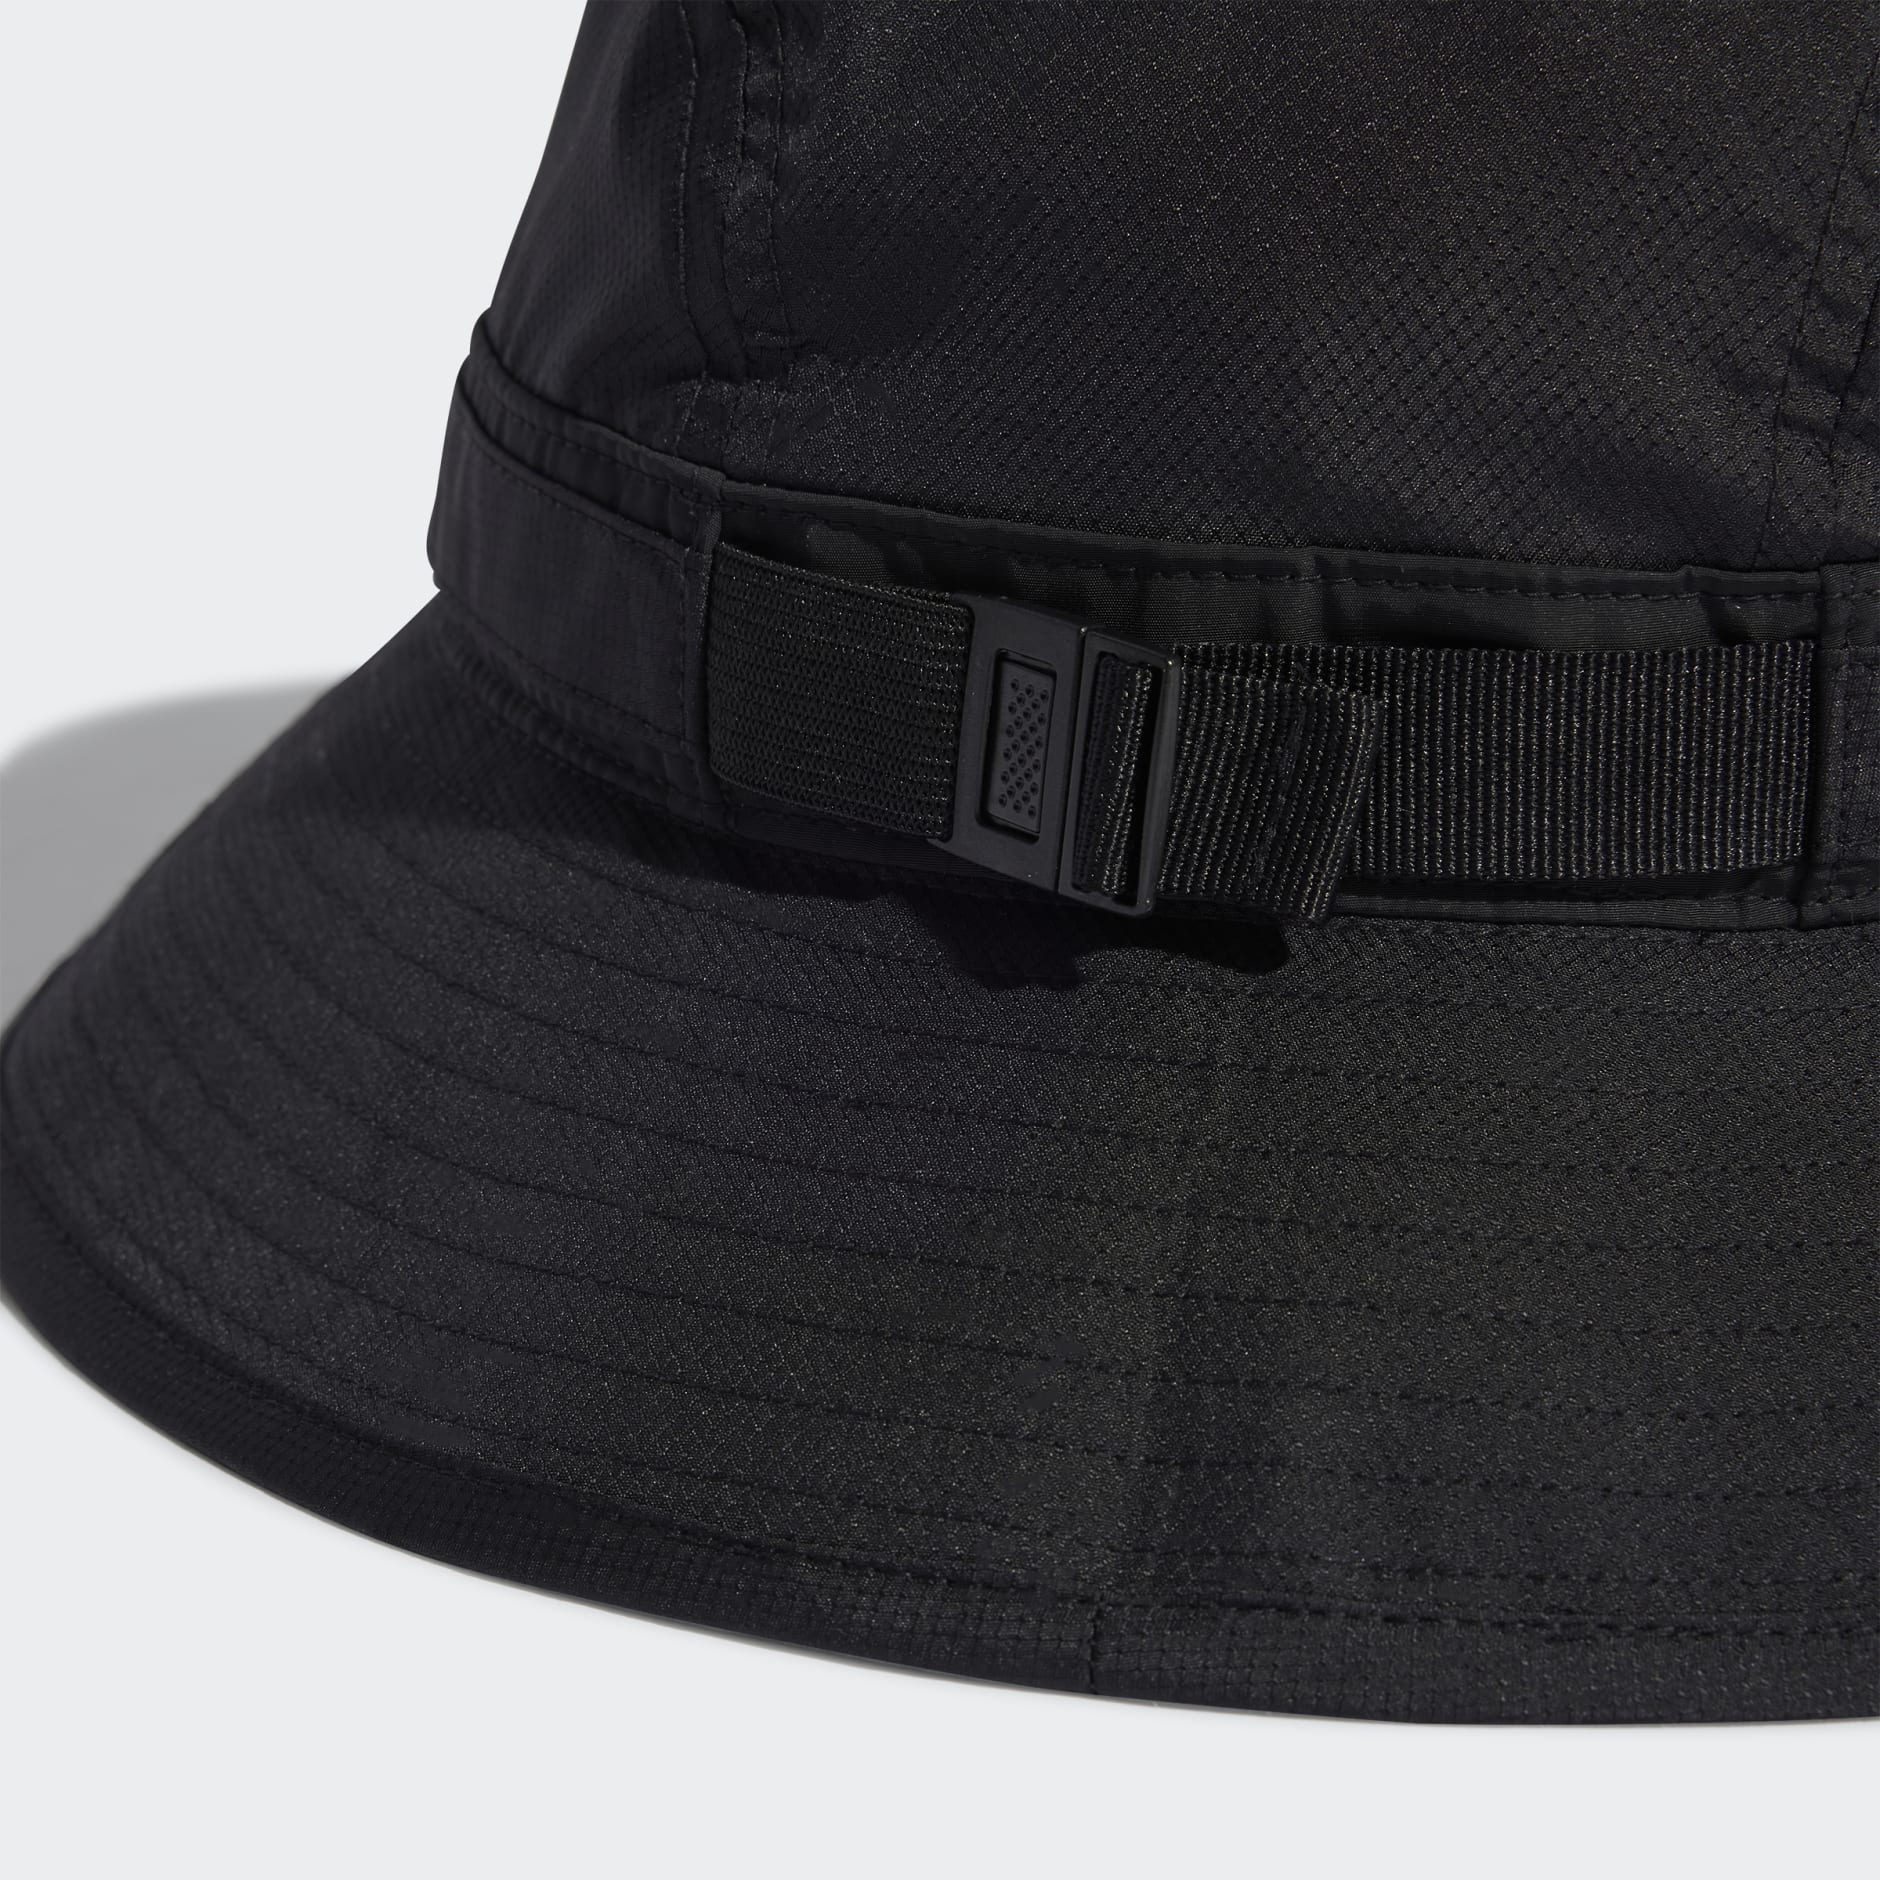 Accessories - WIND.RDY Tech Bucket Hat - Black | adidas South Africa